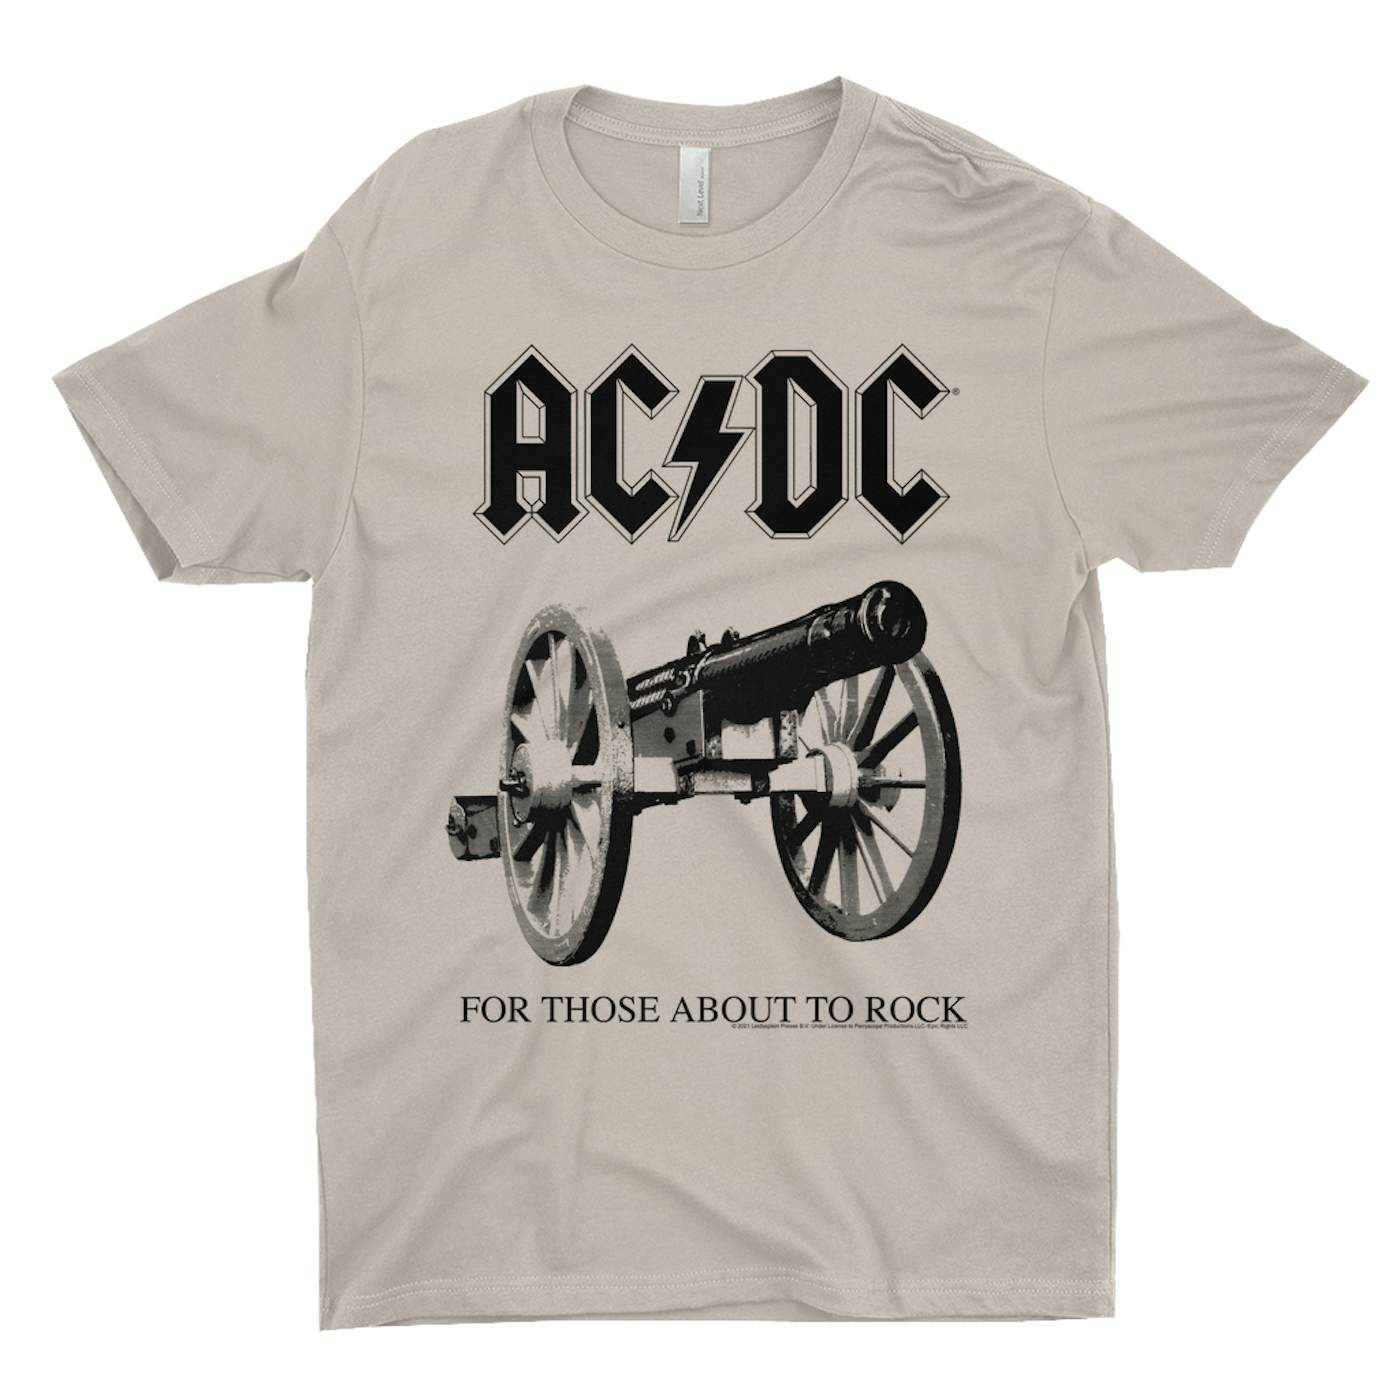 AC/DC T-Shirt Shirt Those About | For Black Cannon Rock To Image